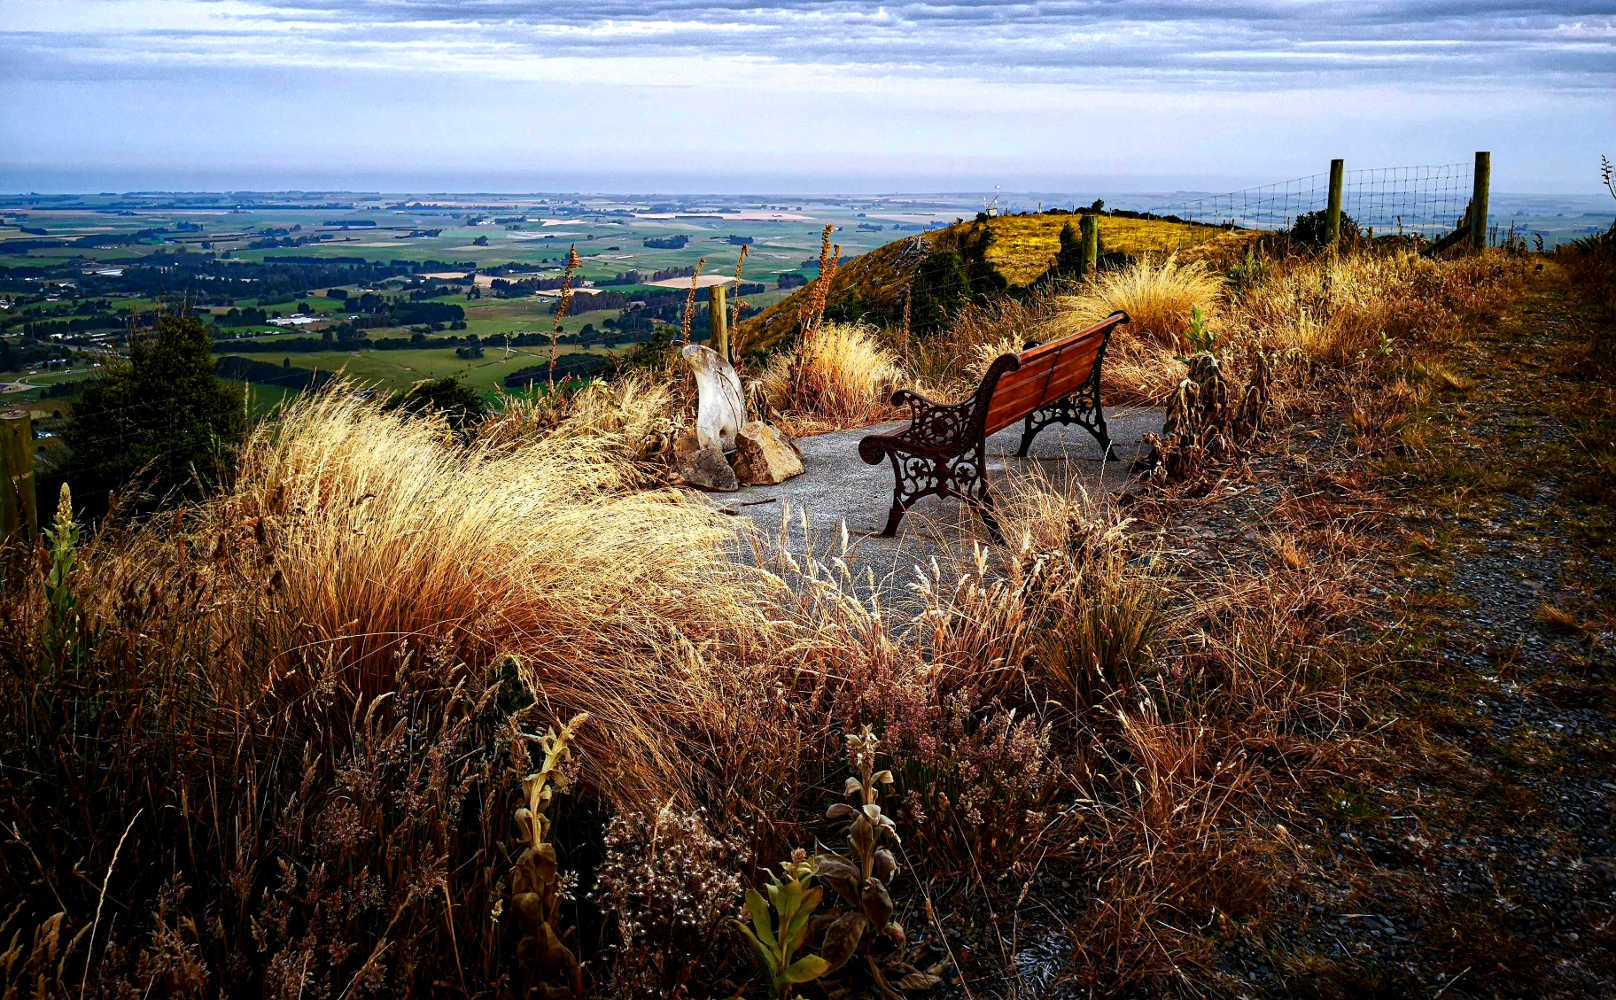 Waimate White Horse lookout seat to take in sunset view